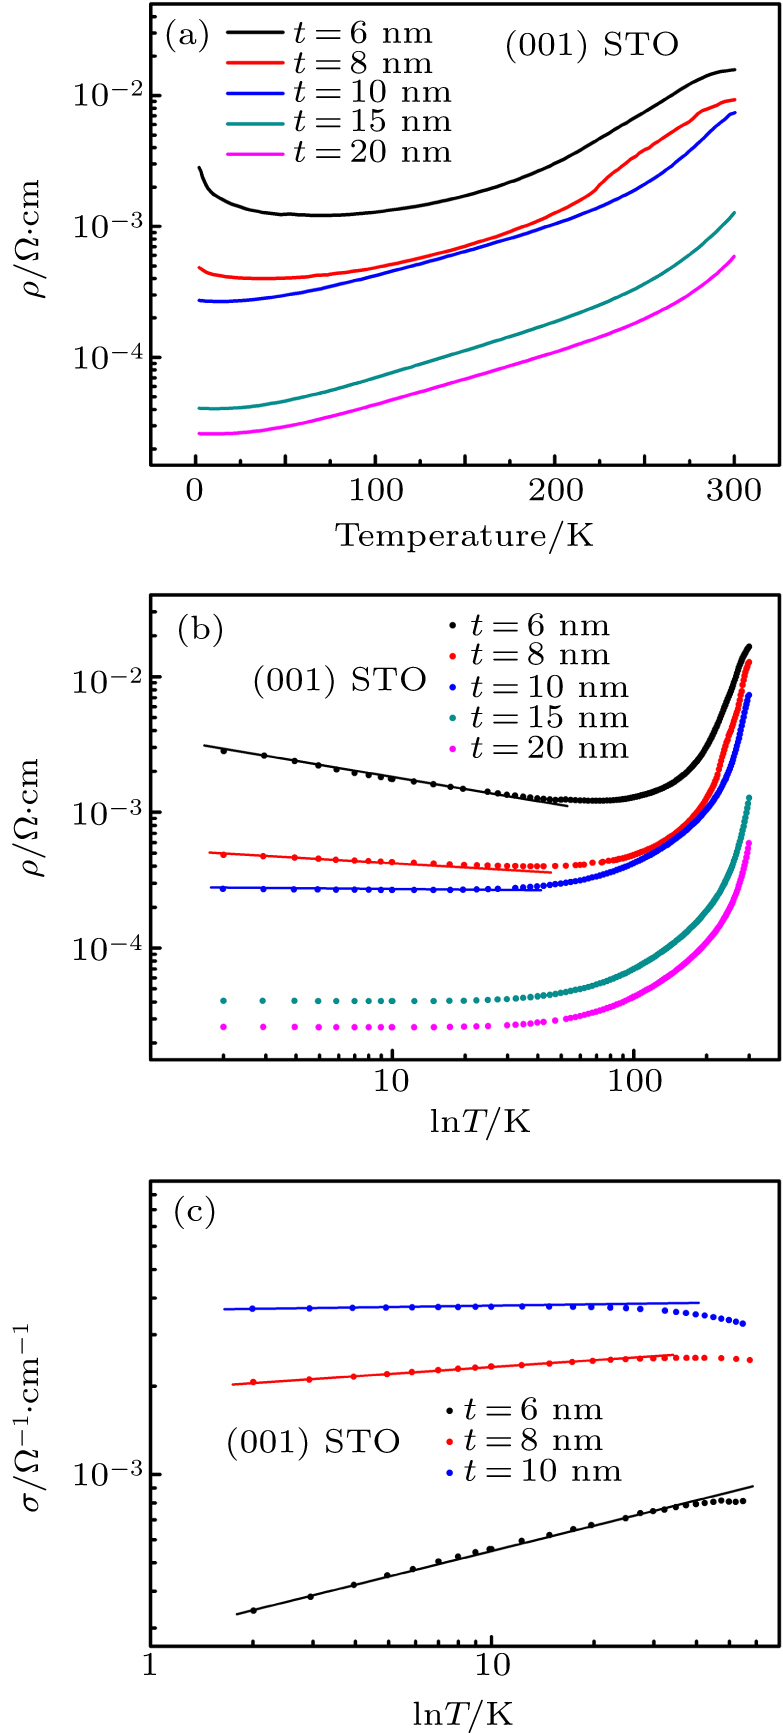 (a) Temperature-dependent resistivity curves of LSMO films with different thicknesses, grown on (001) STO substrate; (b) ρ versus ln T curves, and (c) σ versus ln T curves derived from the data in panel (a).